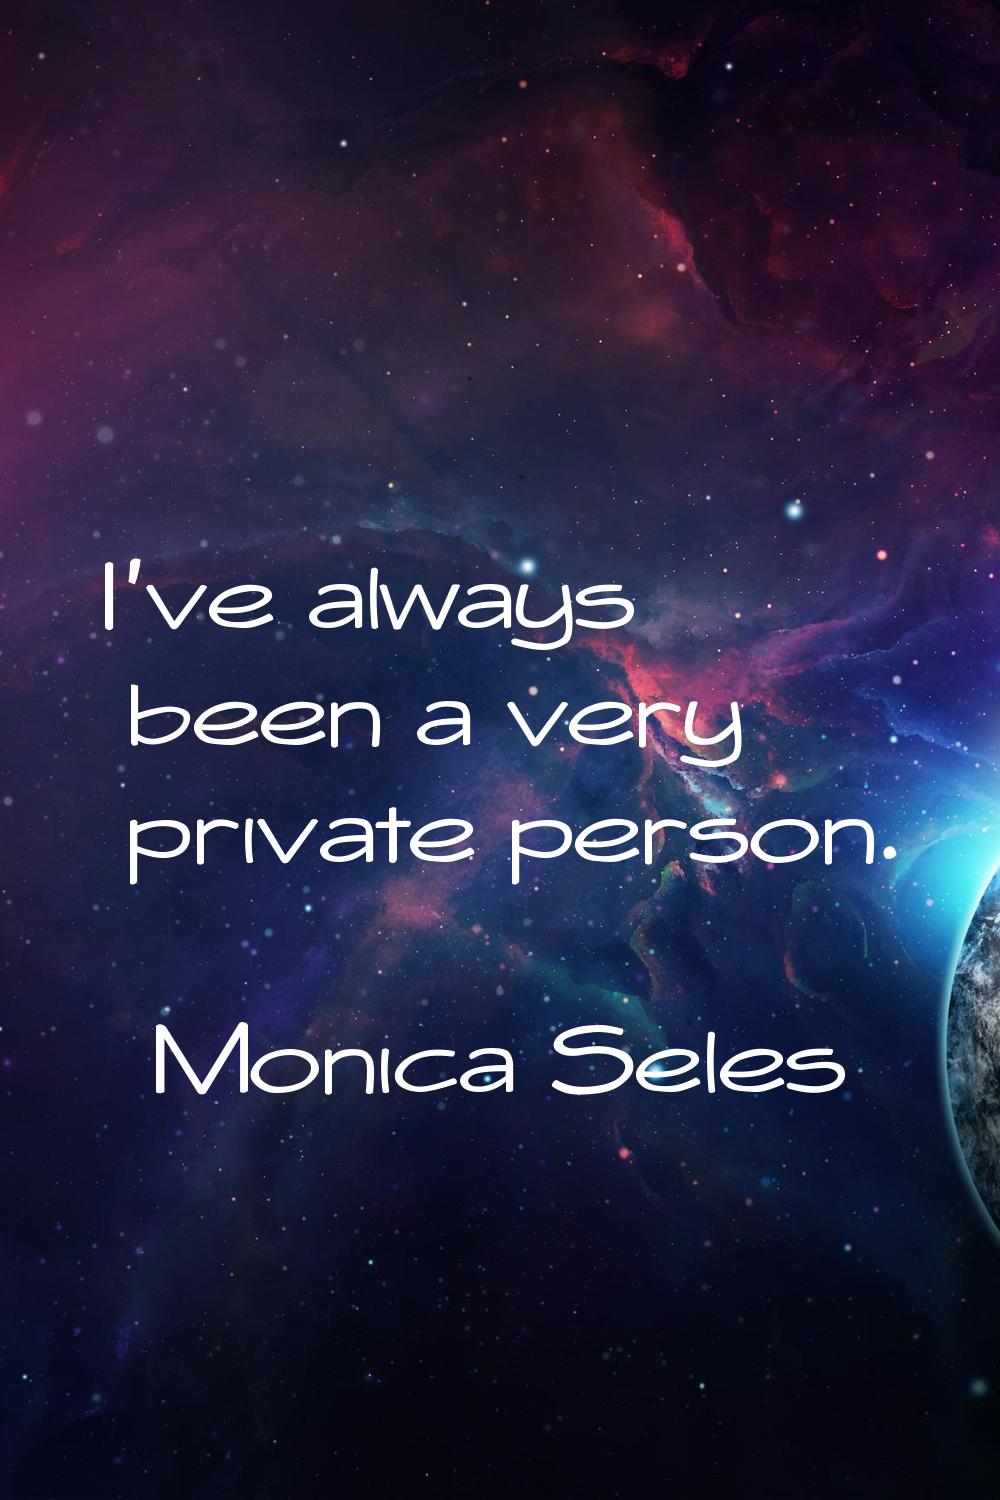 I've always been a very private person.